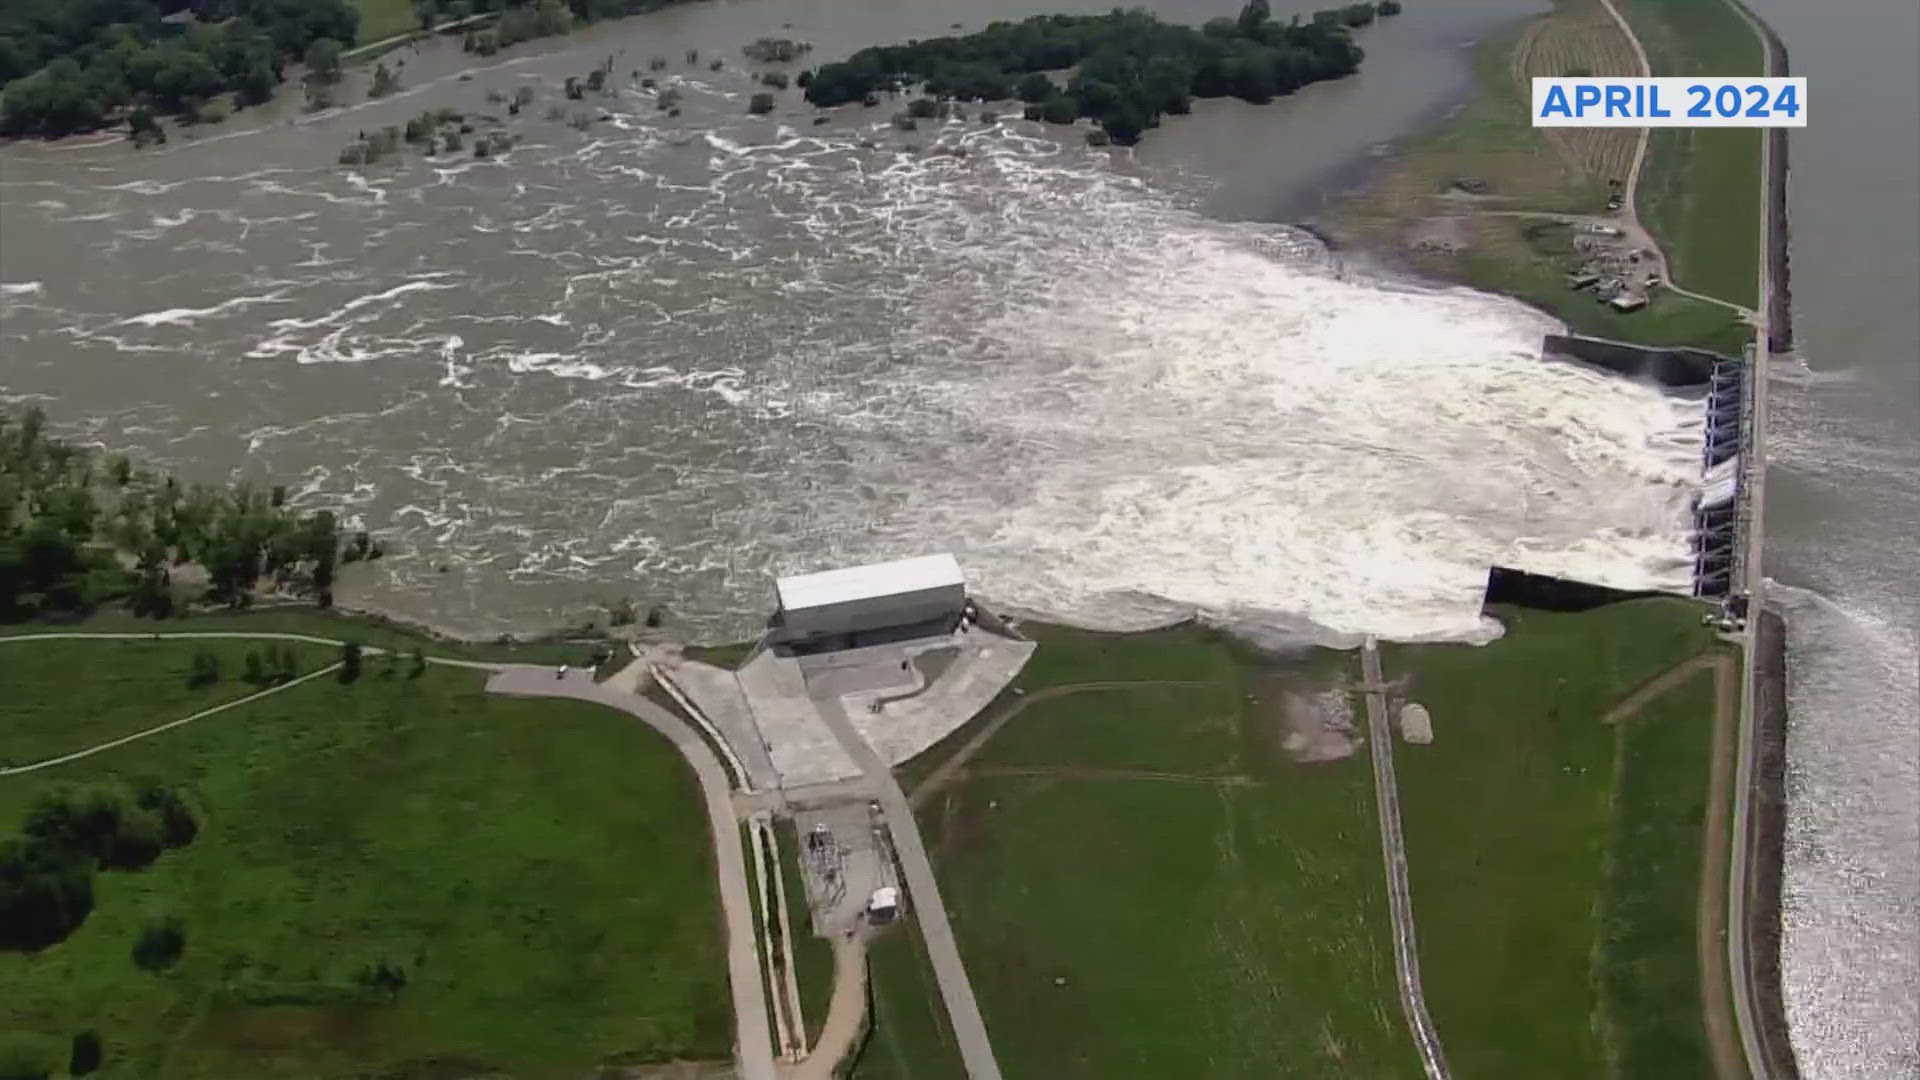 The Trinity River Authority said the spillway of the dam was impacted by recent rainfall and flooding.